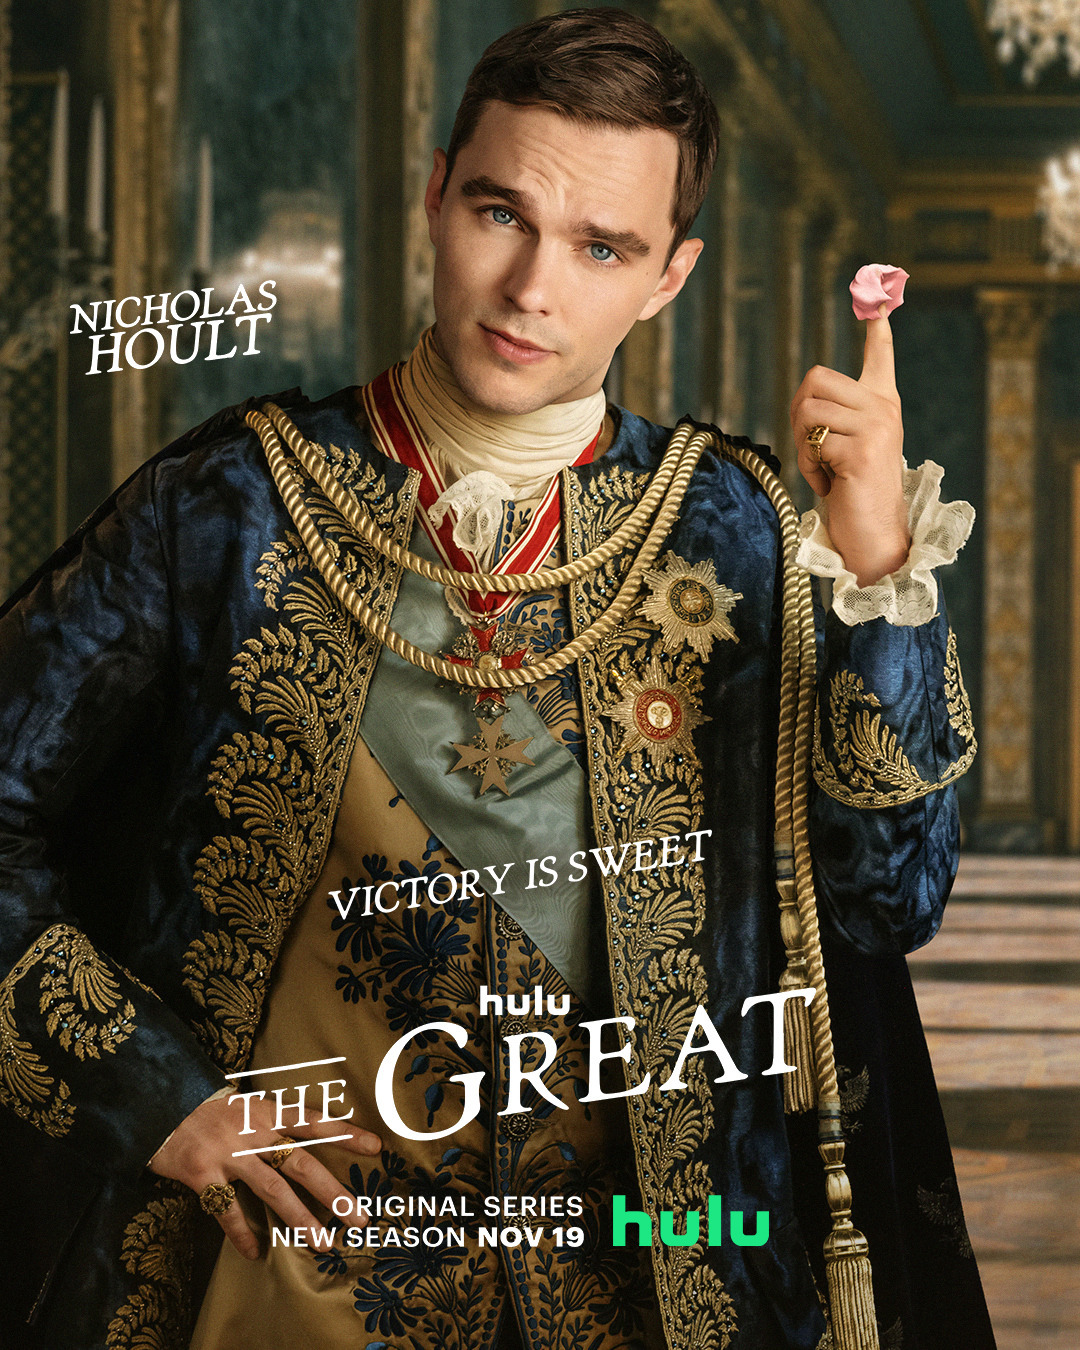 Extra Large TV Poster Image for The Great (#4 of 6)